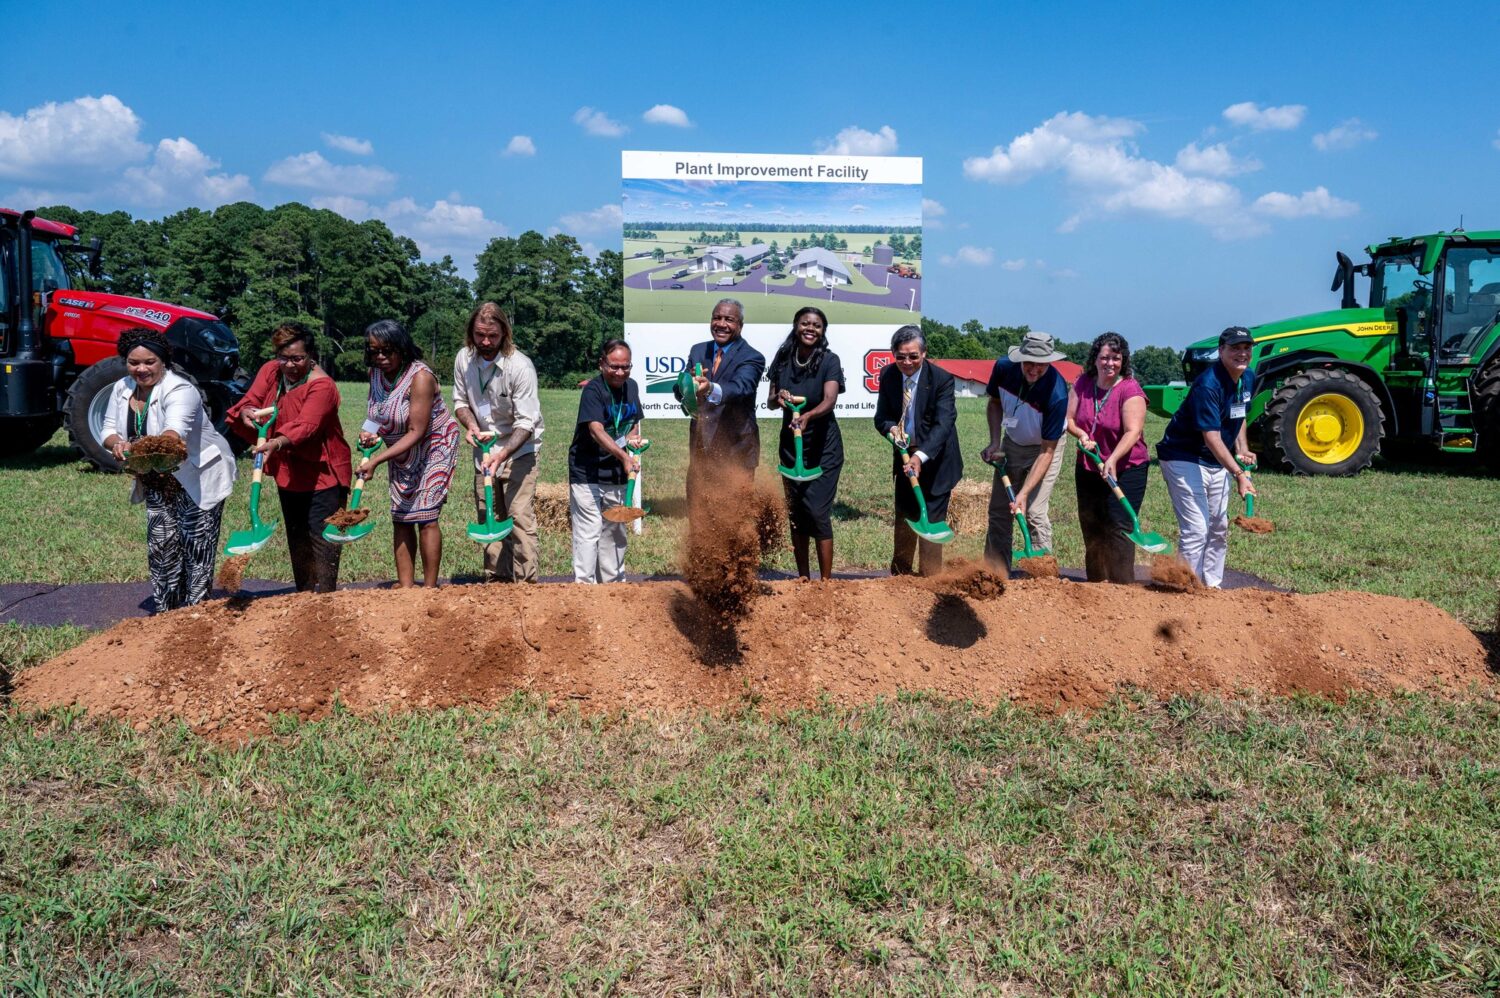 USDA-ARS breaks ground on the new Plant Improvement Facility at NC State's Lake Wheeler Road Field Laboratory.